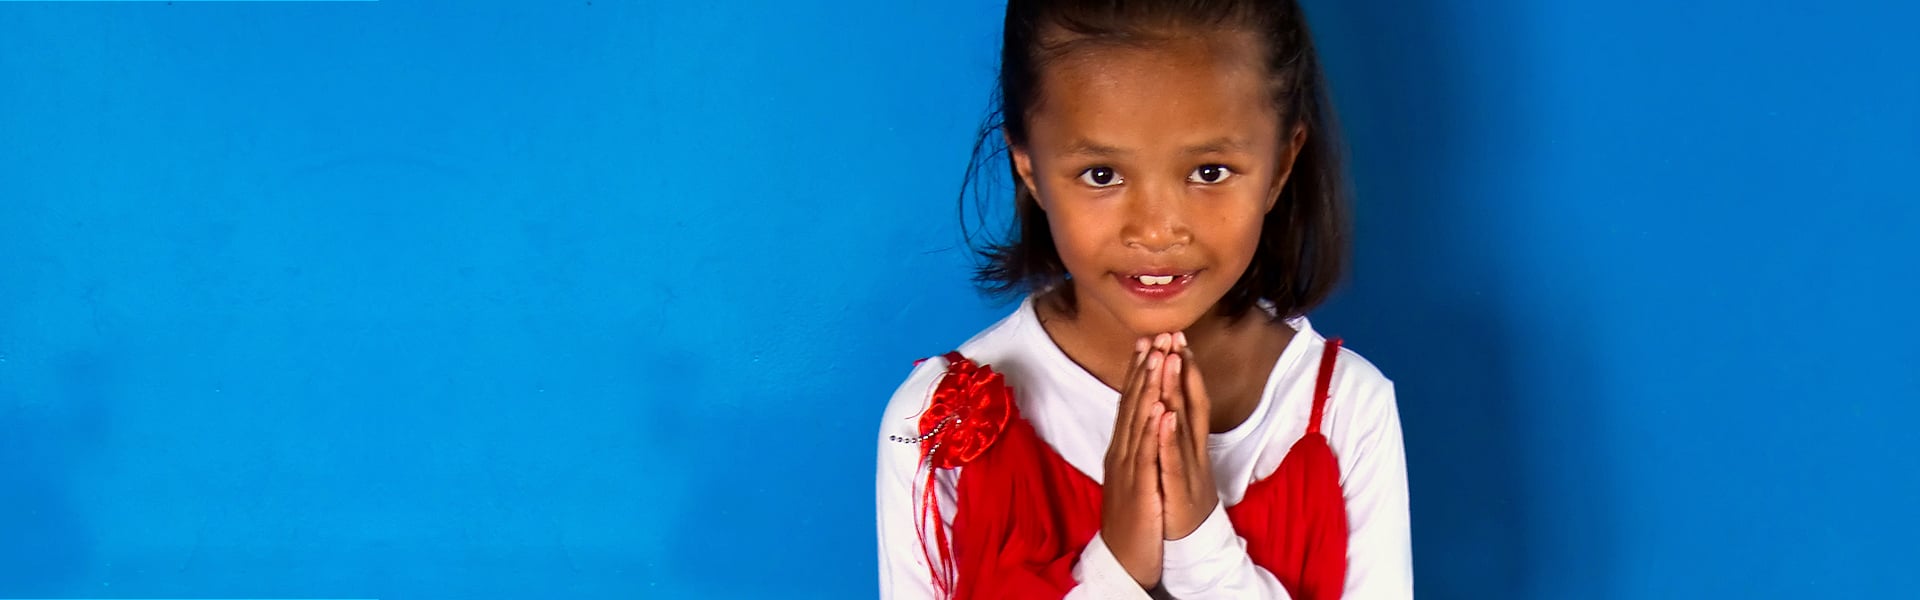 Help Nepali Children by donating a small amount of sponsoring